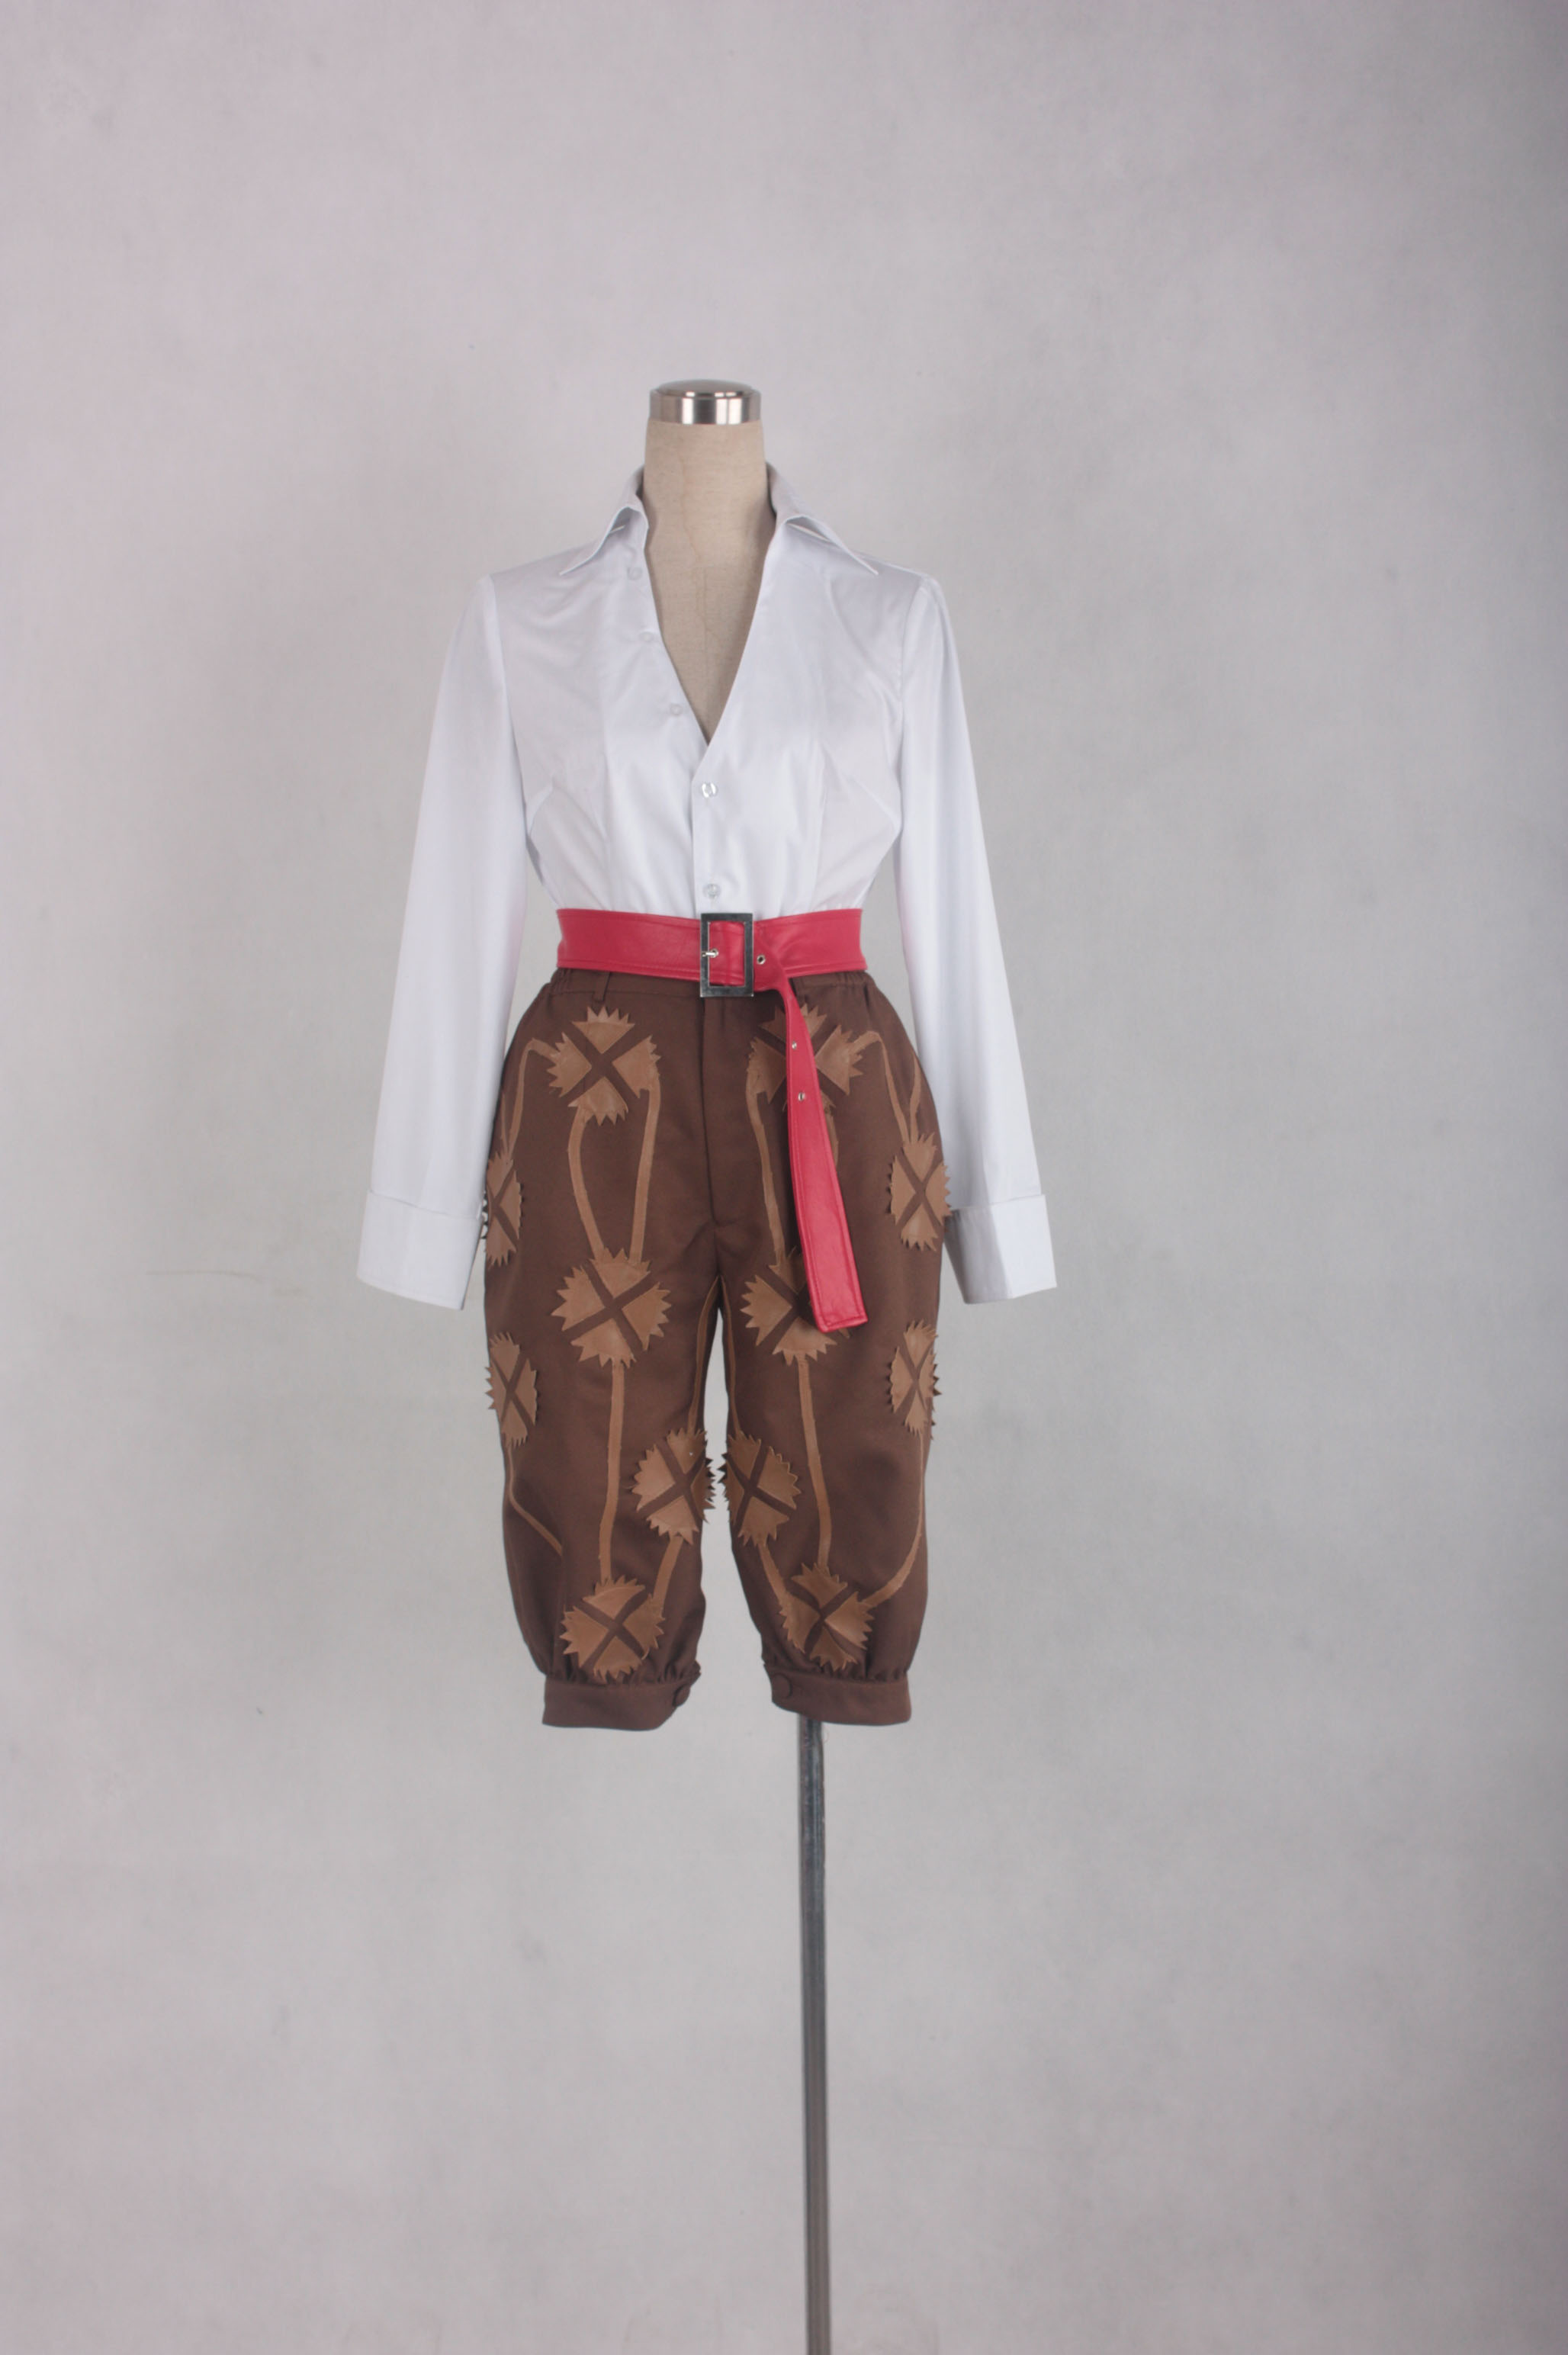 One Piece "Red-Haired" Shanks Two Years Ago Cosplay Costume